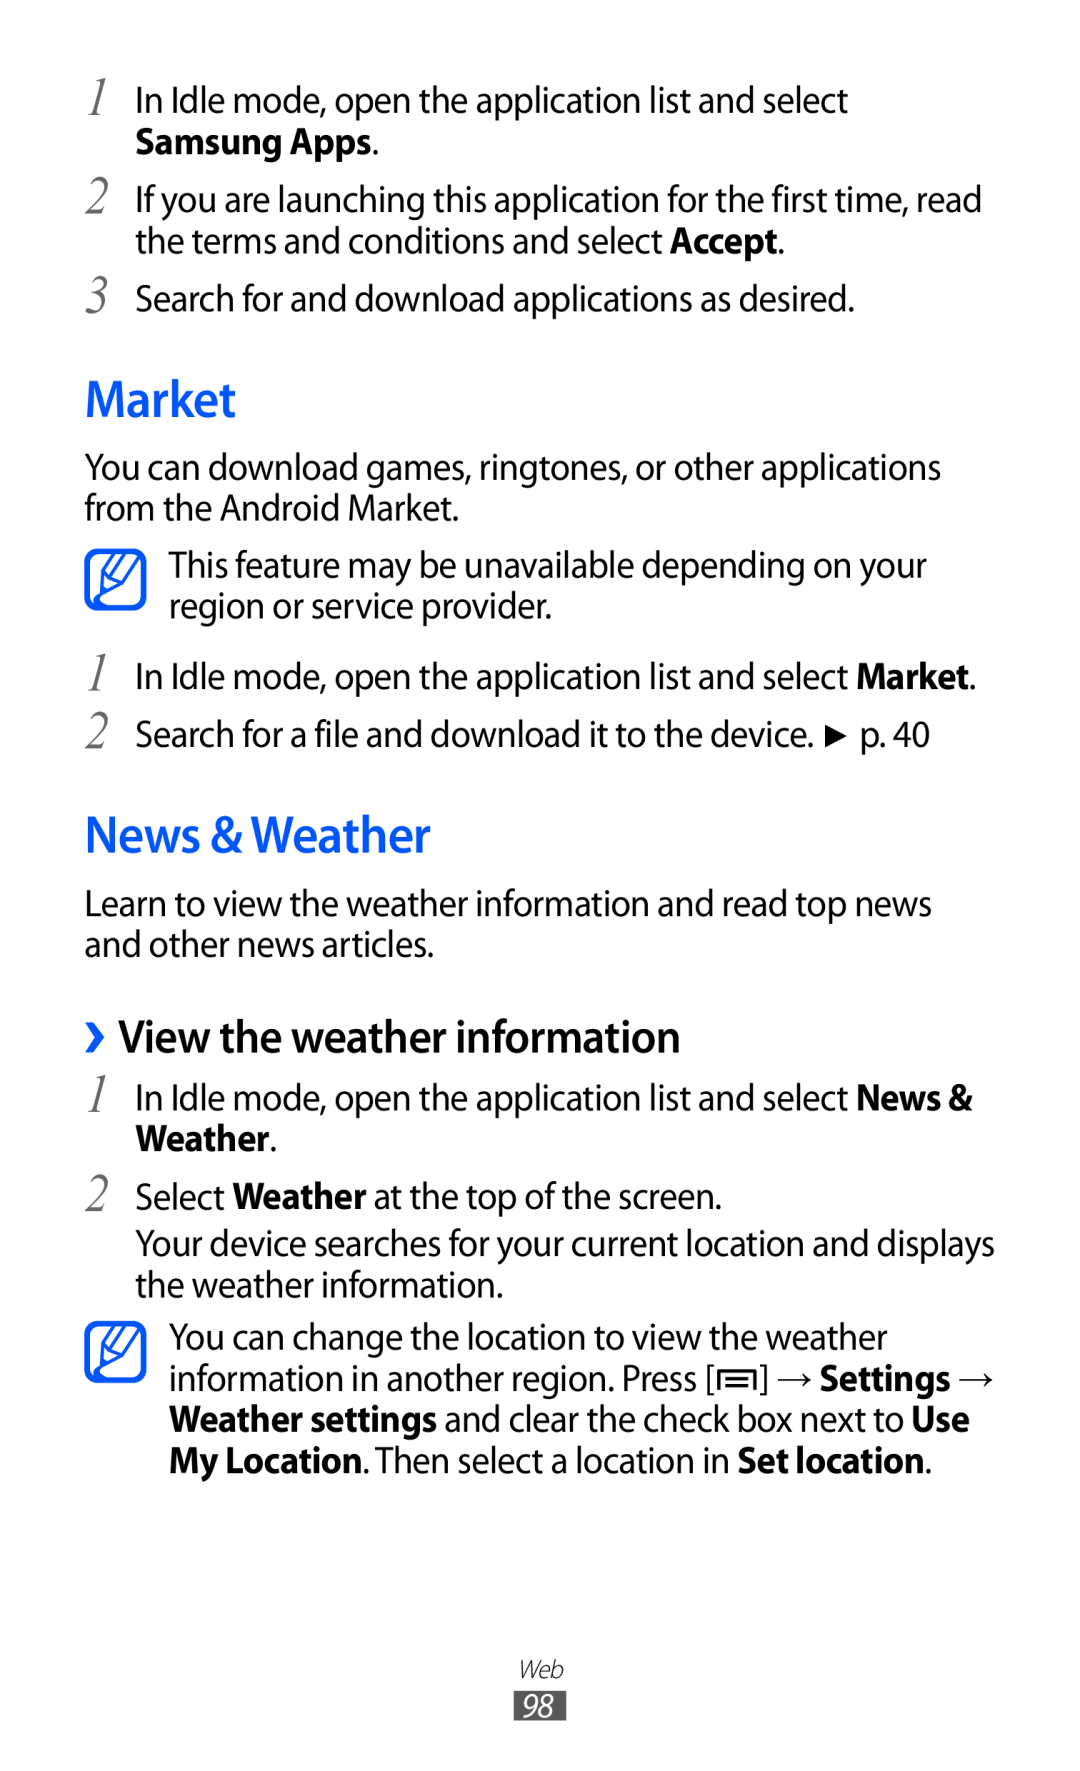 Samsung GT-I9070 user manual Market, News & Weather, ››View the weather information, Samsung Apps 